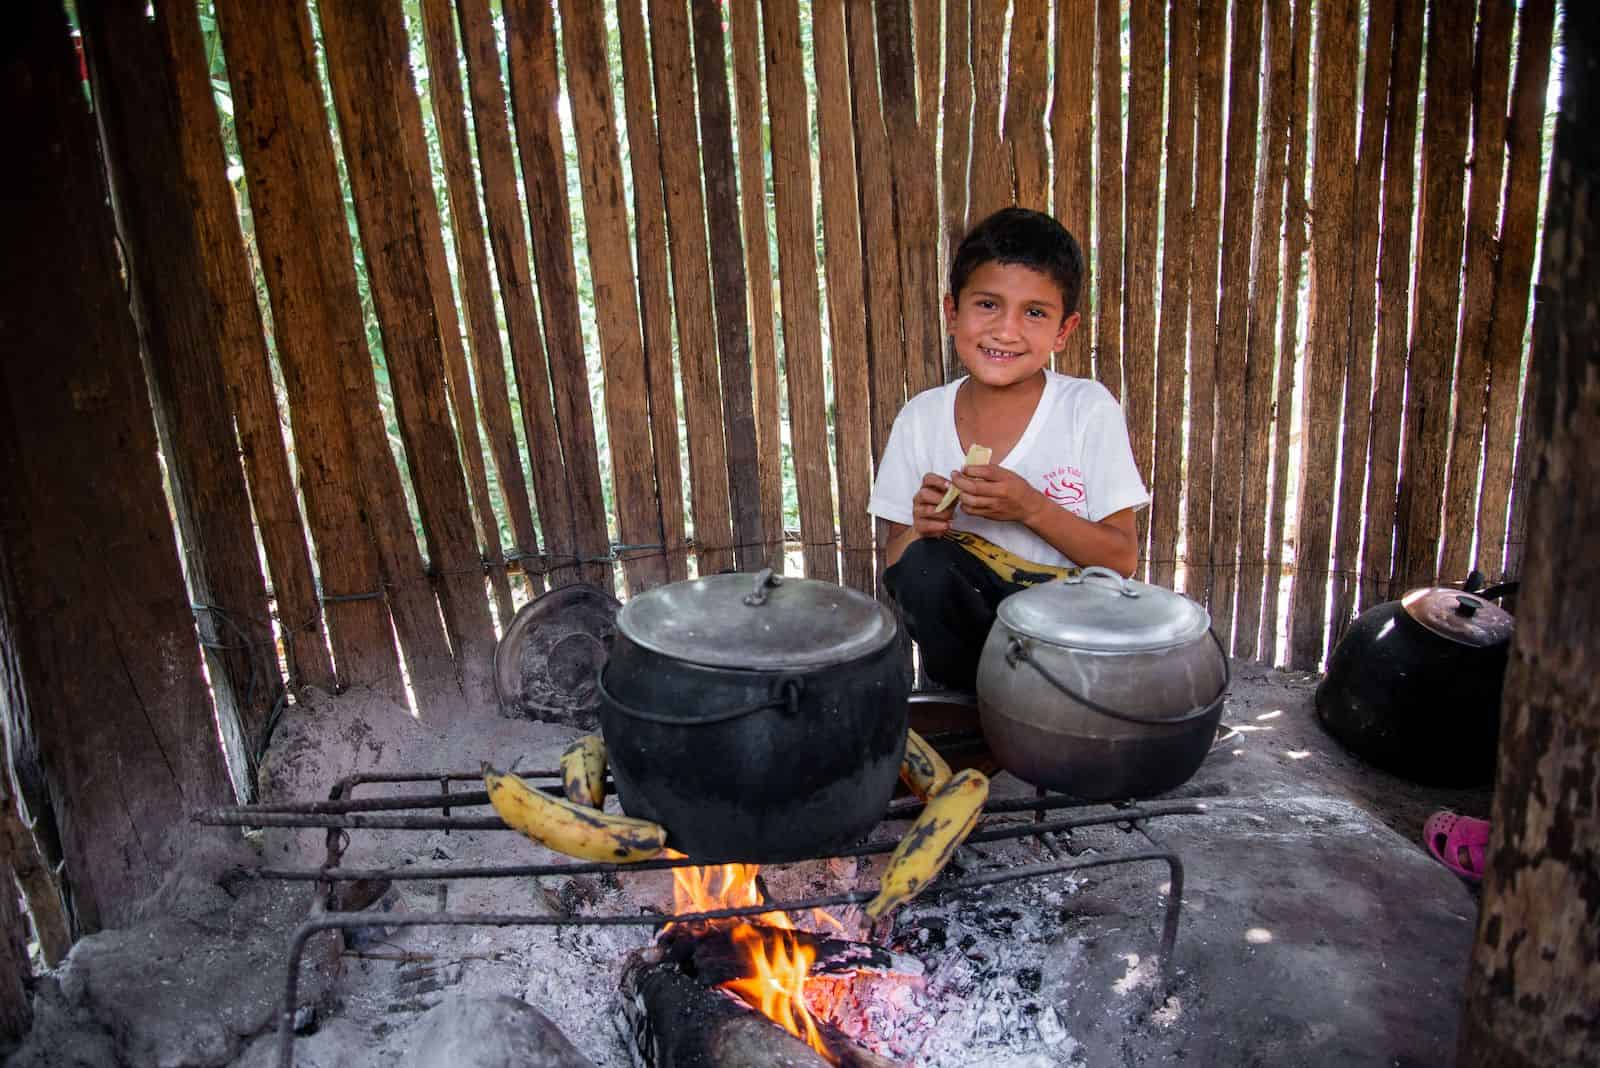 A boy wearing a white shirt crouches in front of a wood fire that has a wire frame over it with several plantains on it and two black pots. 